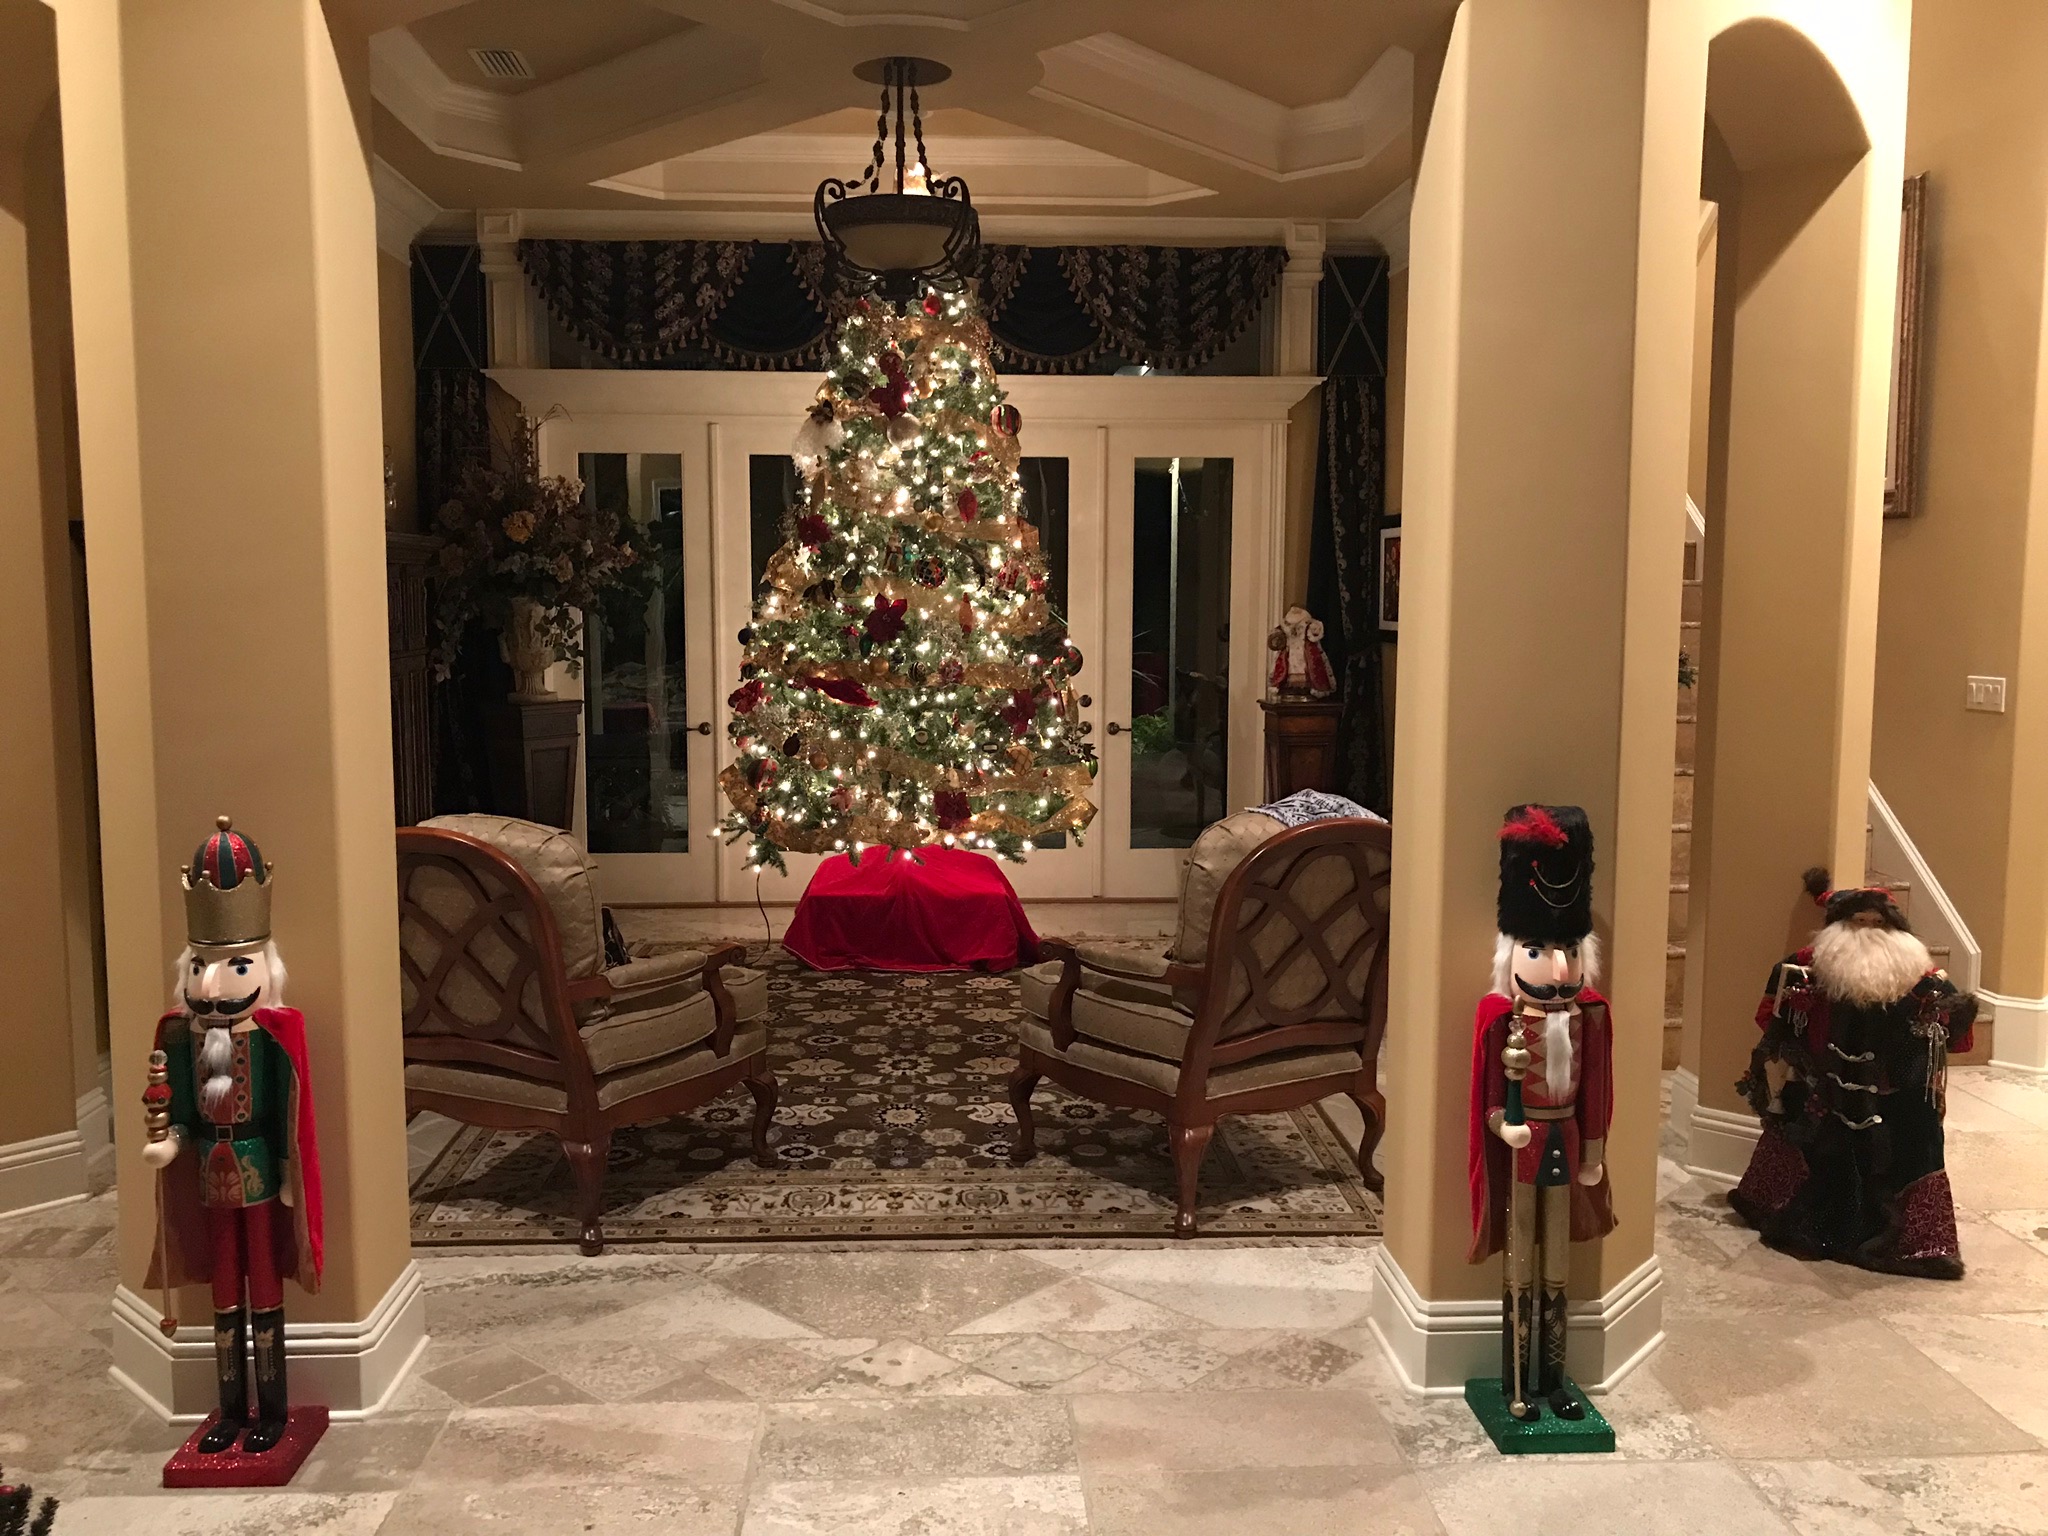 Before and After: Flocking and Decorating a Christmas Tree » My View in  Heels